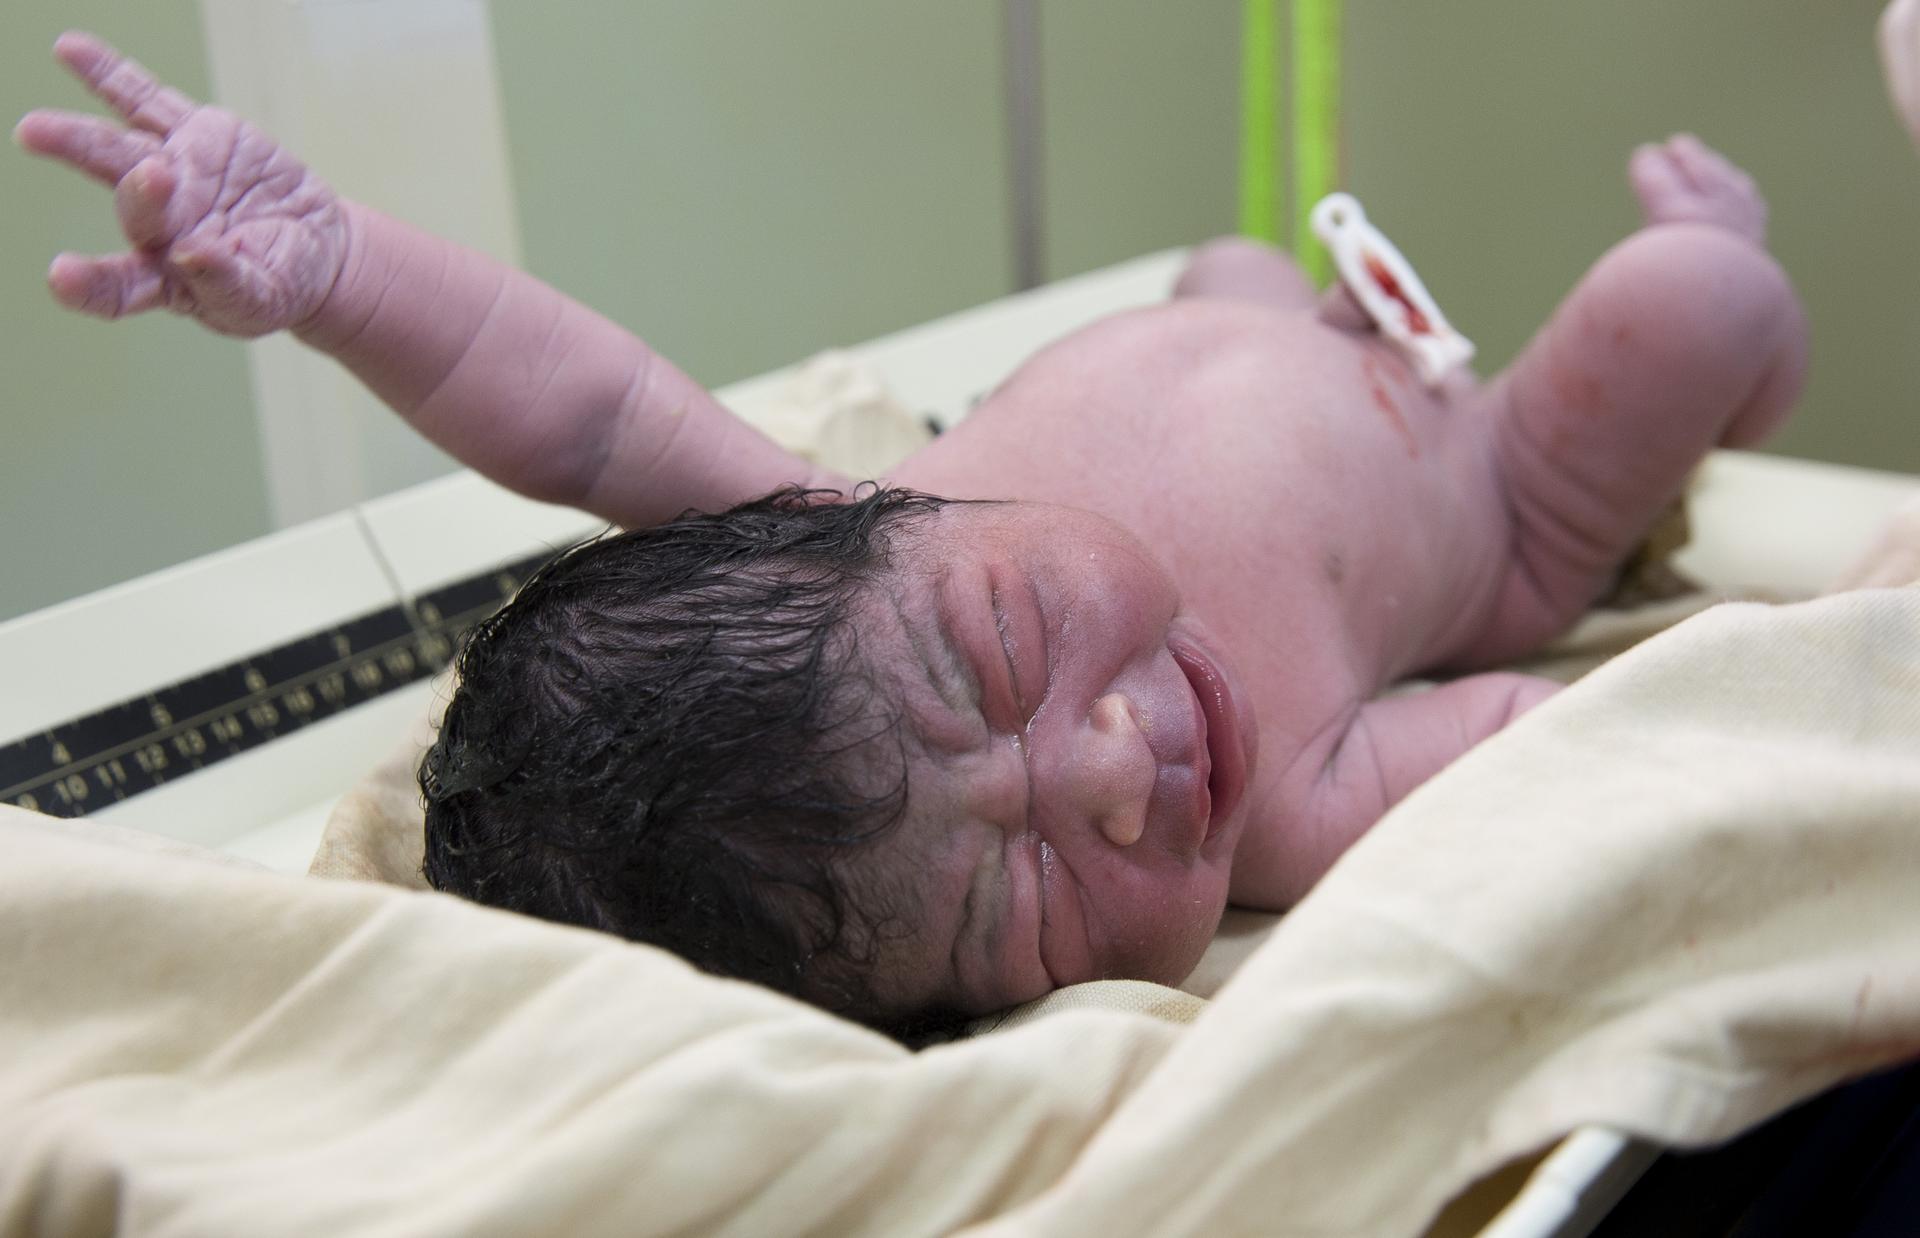 newborn baby with black wet hair and fist raised and clipped belly button